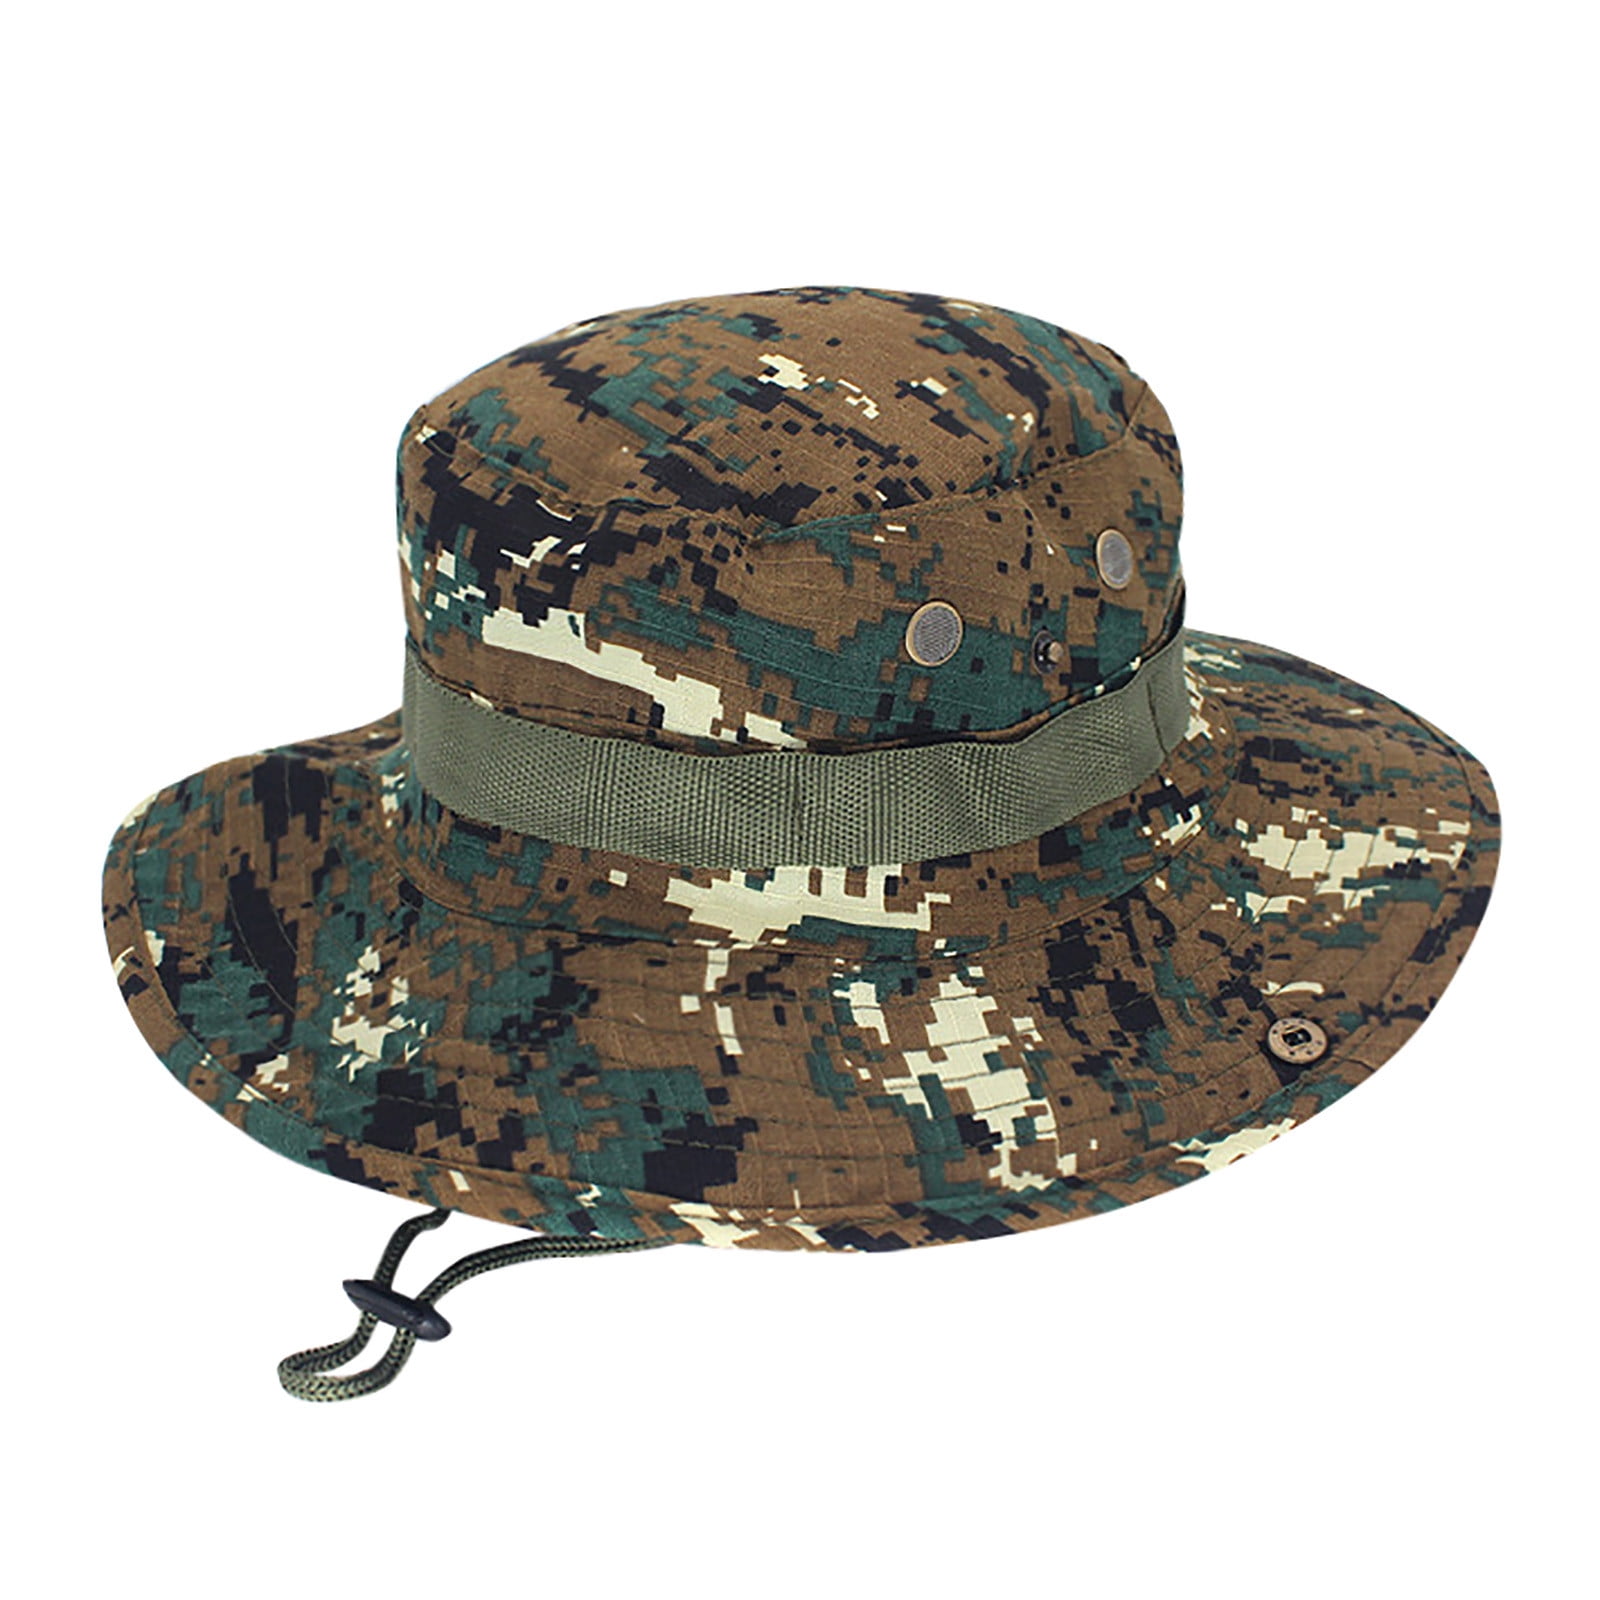 LBECLEY Bucket Hat Warm Fisherman Hats Cotton Blended Fasteners Travellady Golfing  Hats for Men Hats for Men Women Bucket Hat Mens Hats Camouflage One Size 